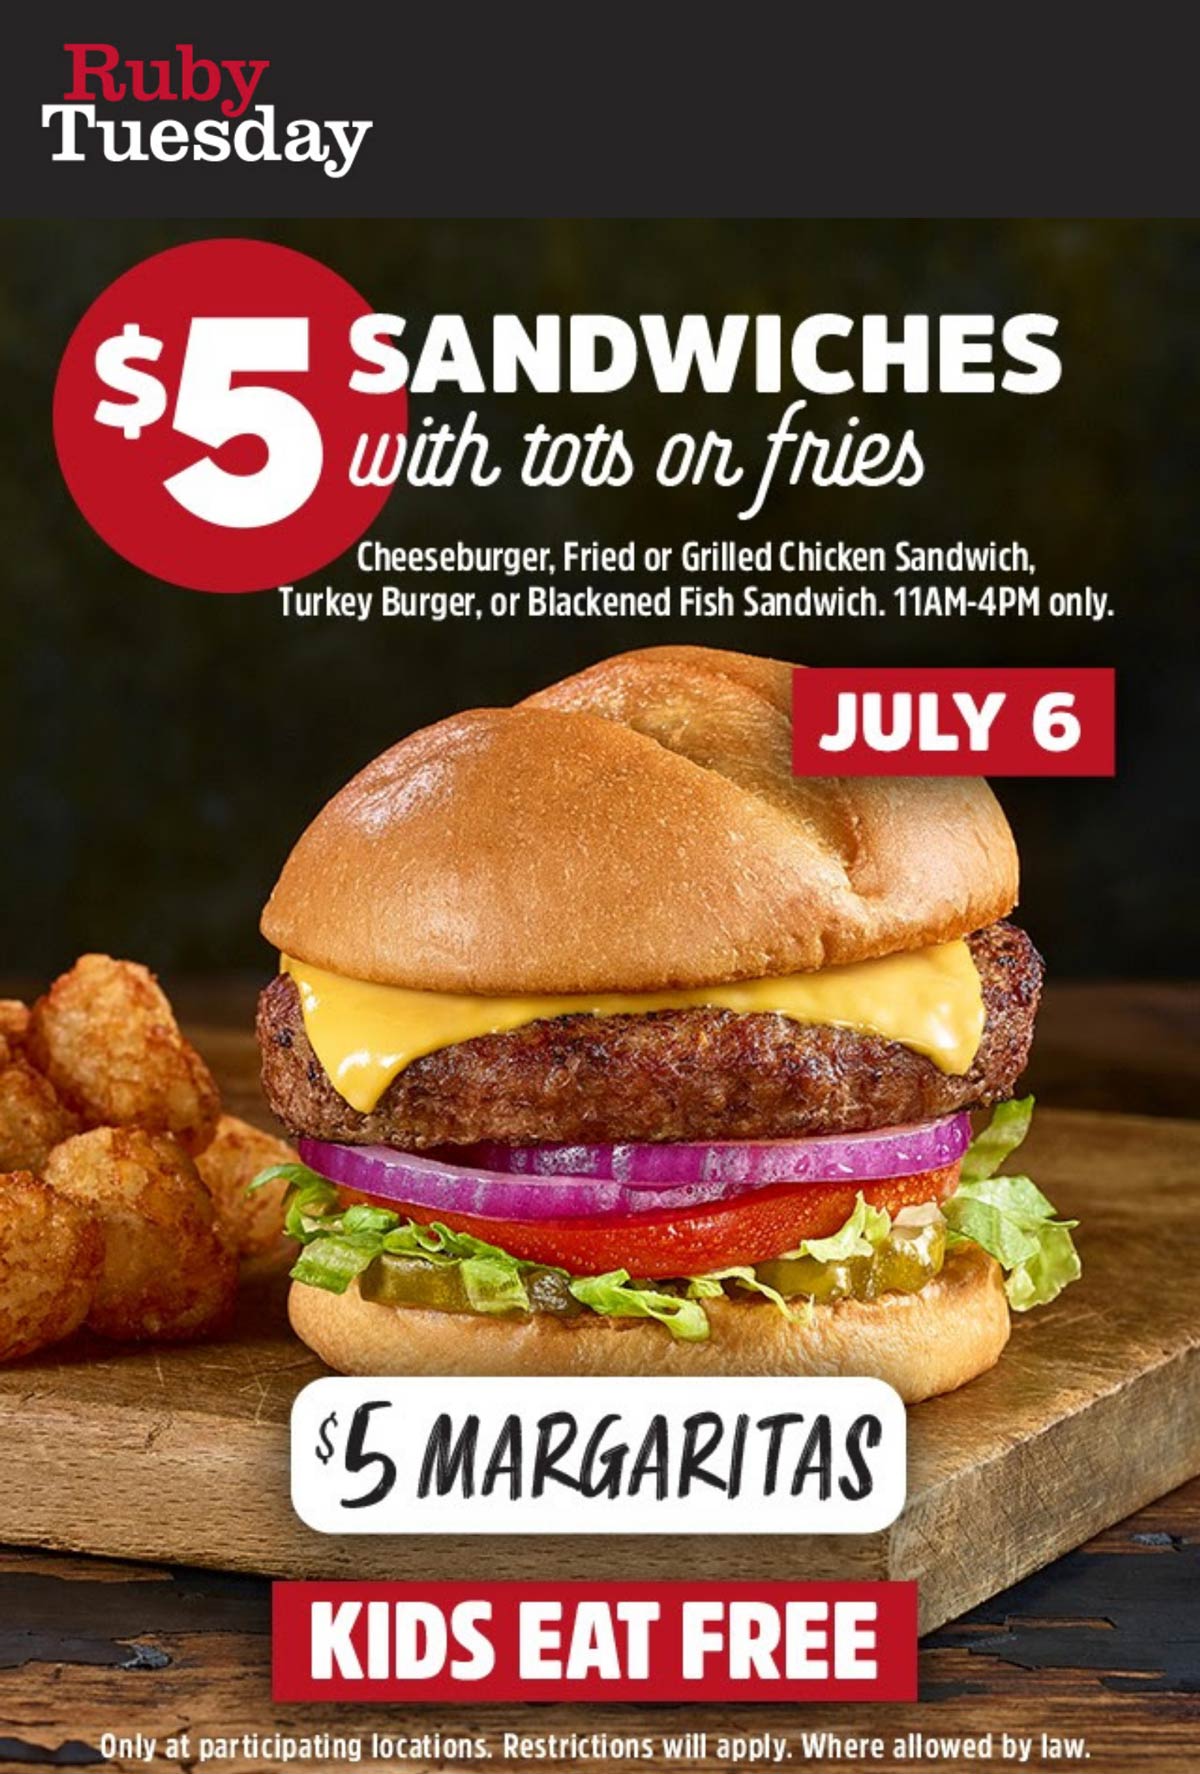 Ruby Tuesday restaurants Coupon  $5 cheeseburger or sandwiches + fries today at Ruby Tuesday #rubytuesday 